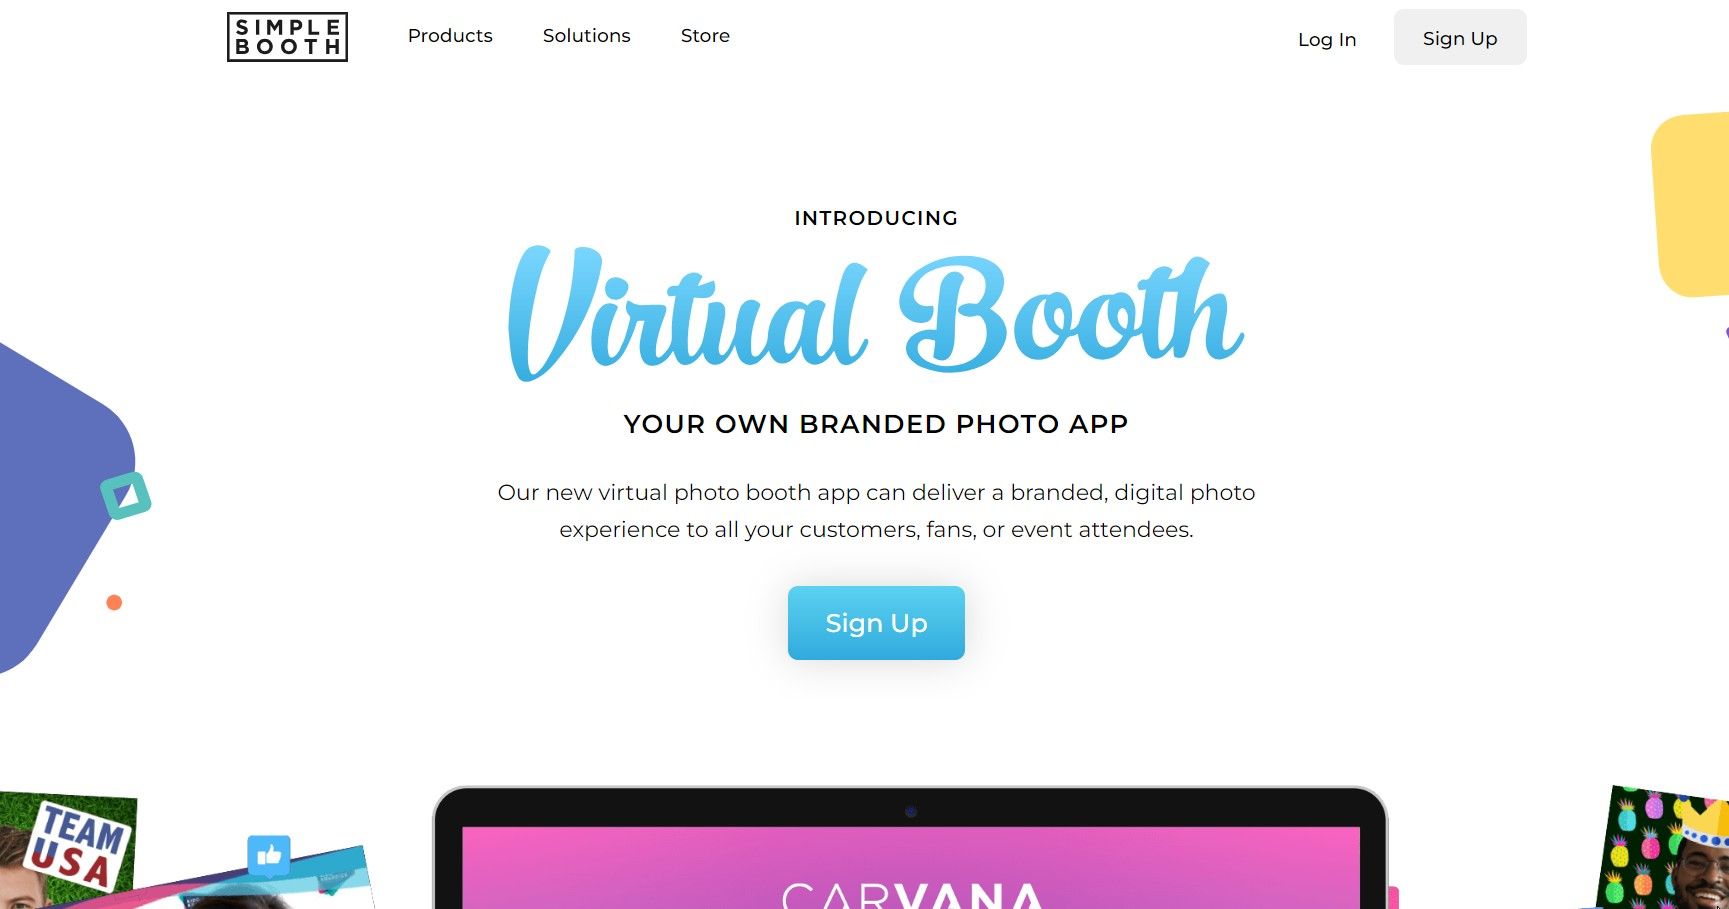 Simple Booth Virtual Photo Booth - Interactive Digital Photo Experience Across Multiple Devices